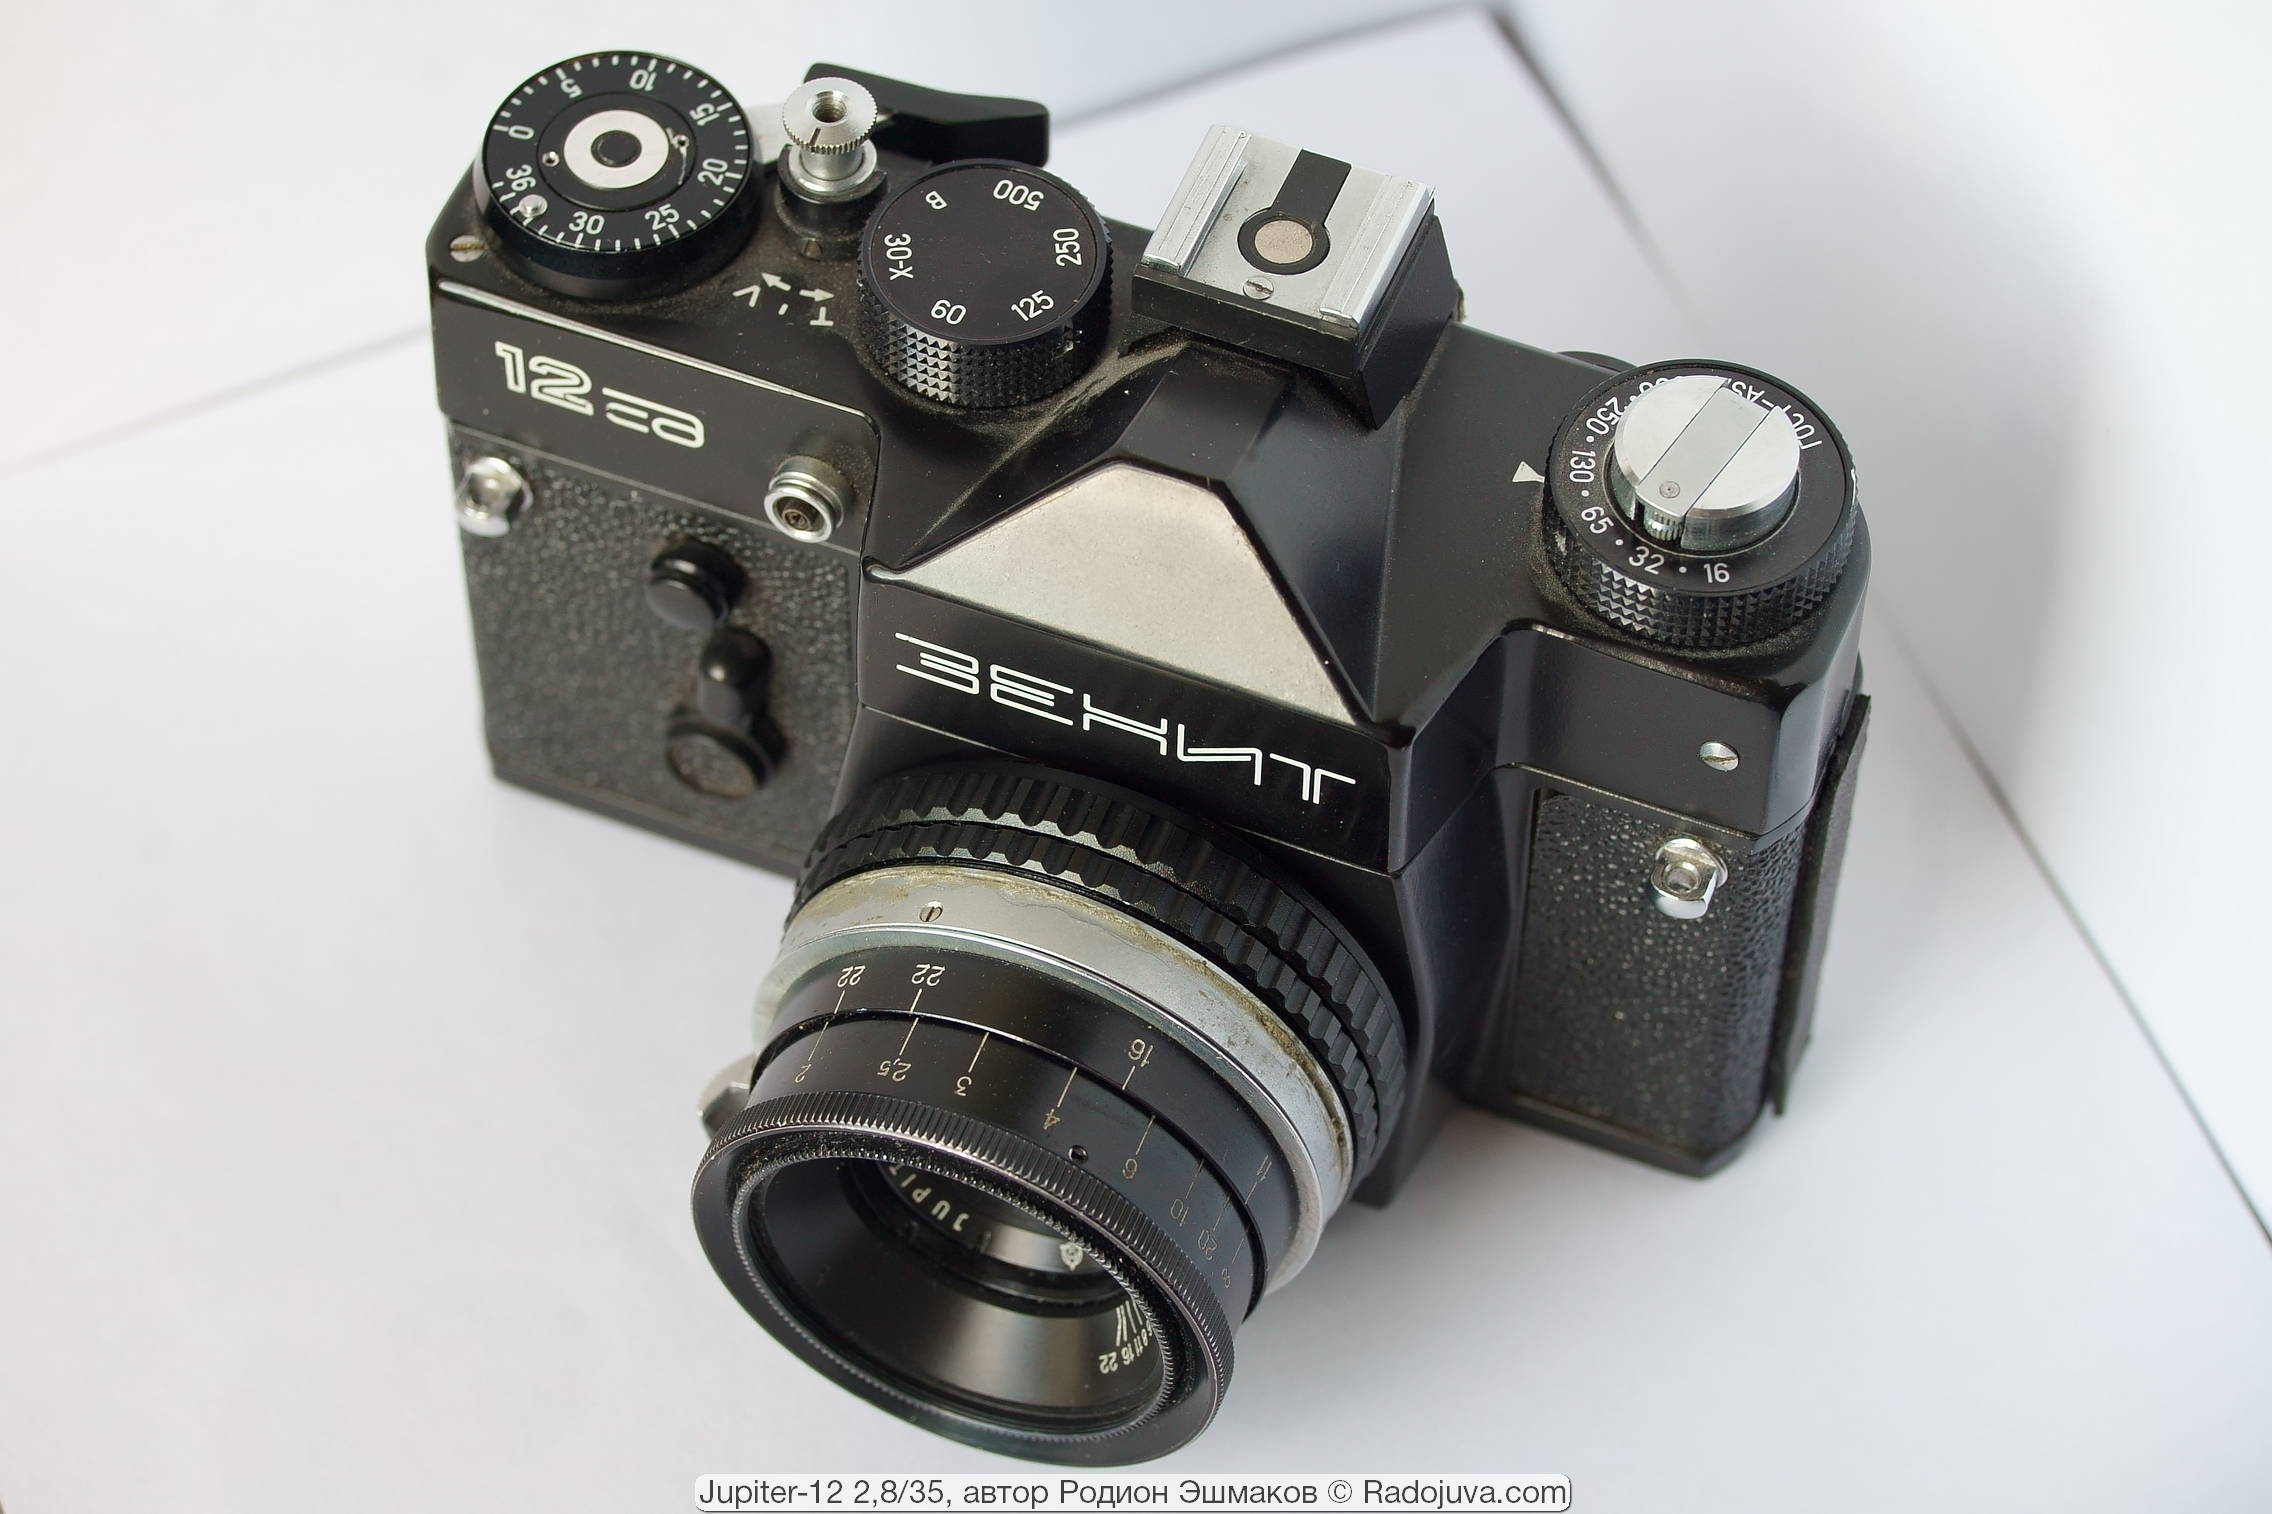 Modified Jupiter-12 can only be attached to the Zenith camera through a macrohelicoid.